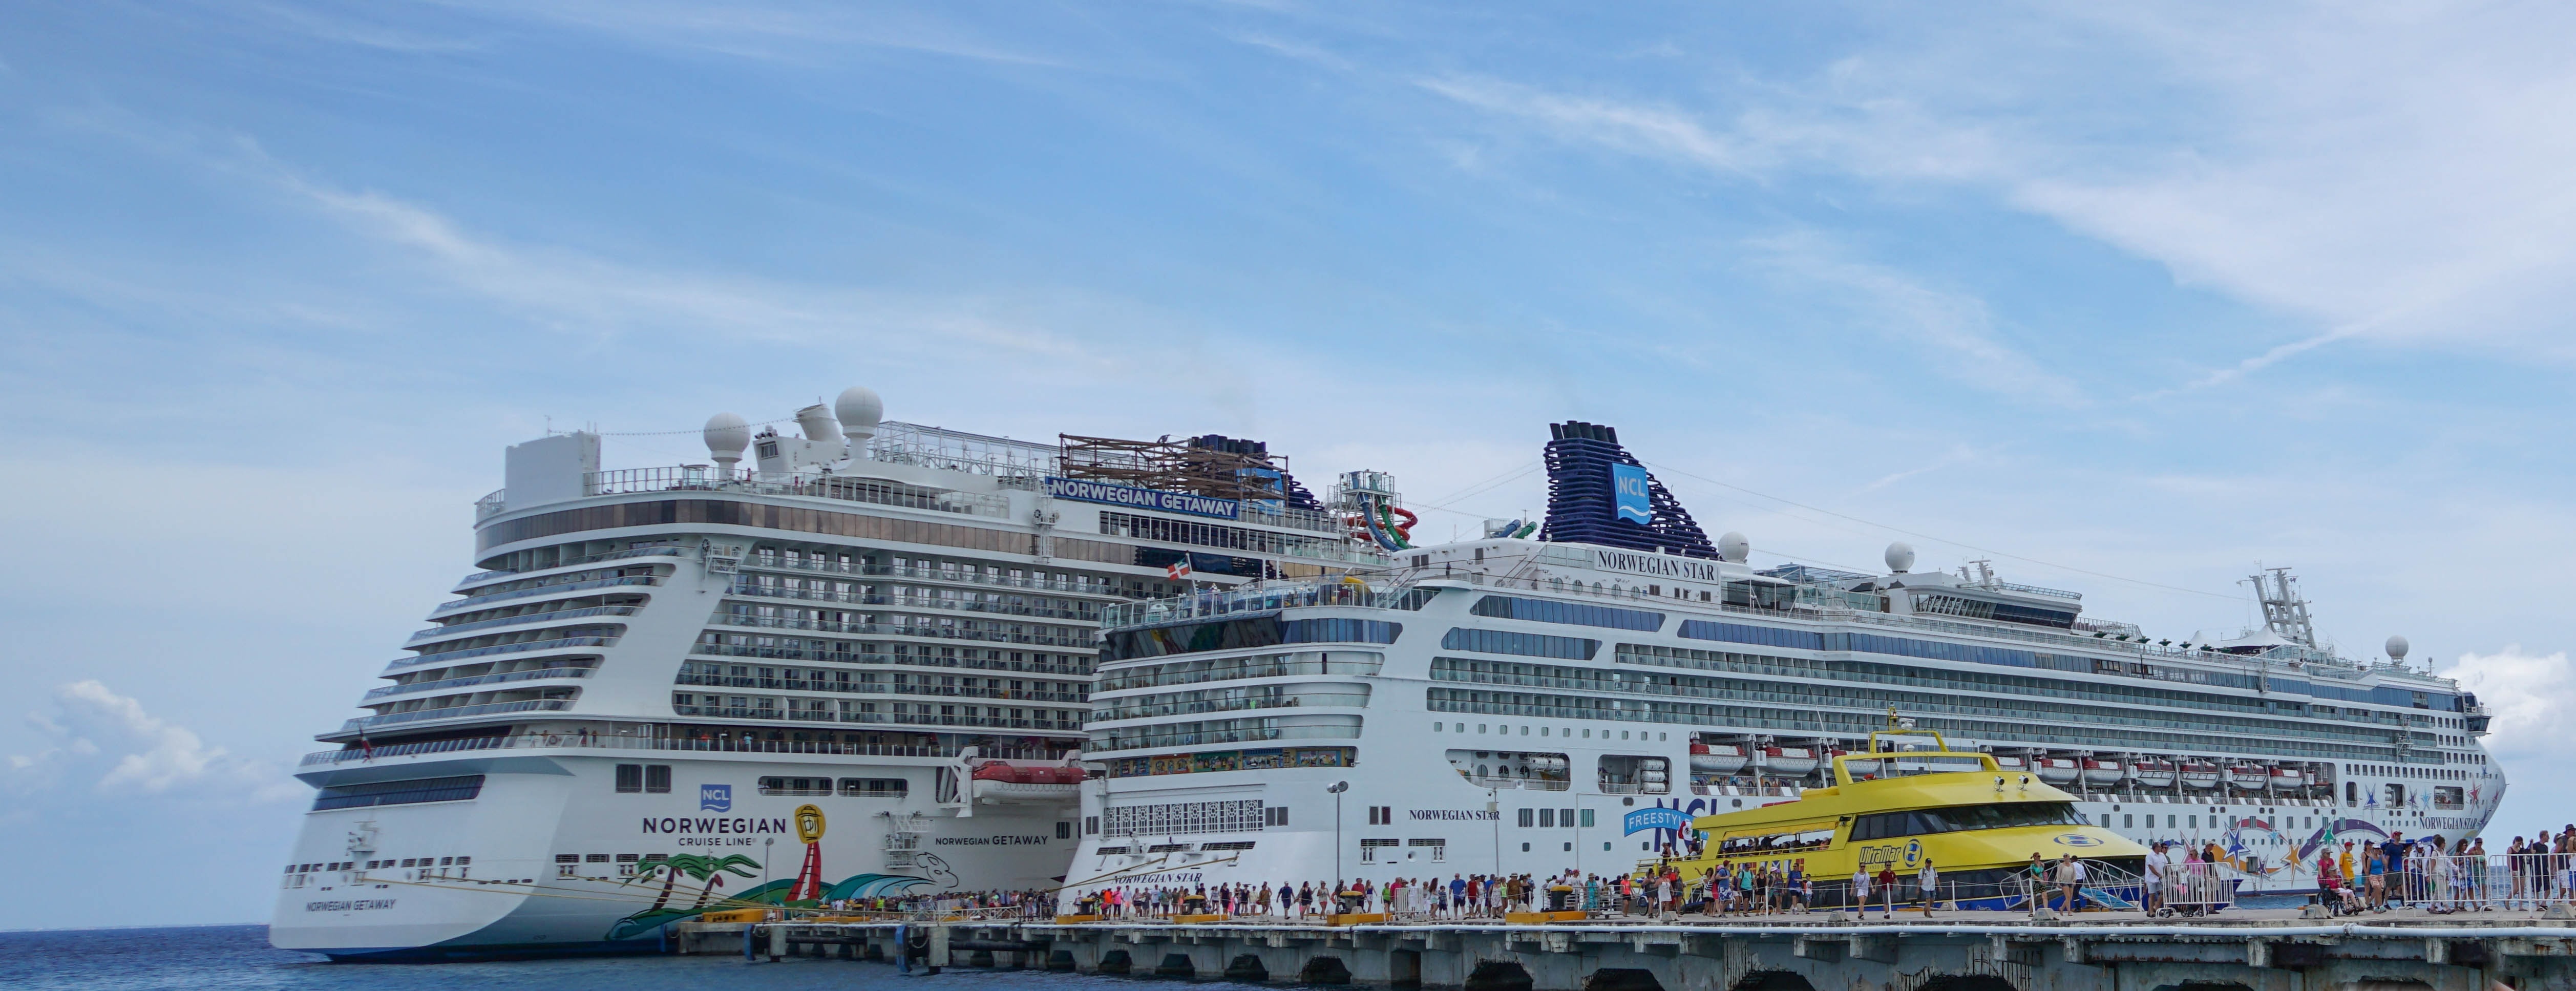 Norwegian Star, Cruise Ships, building exterior, architecture